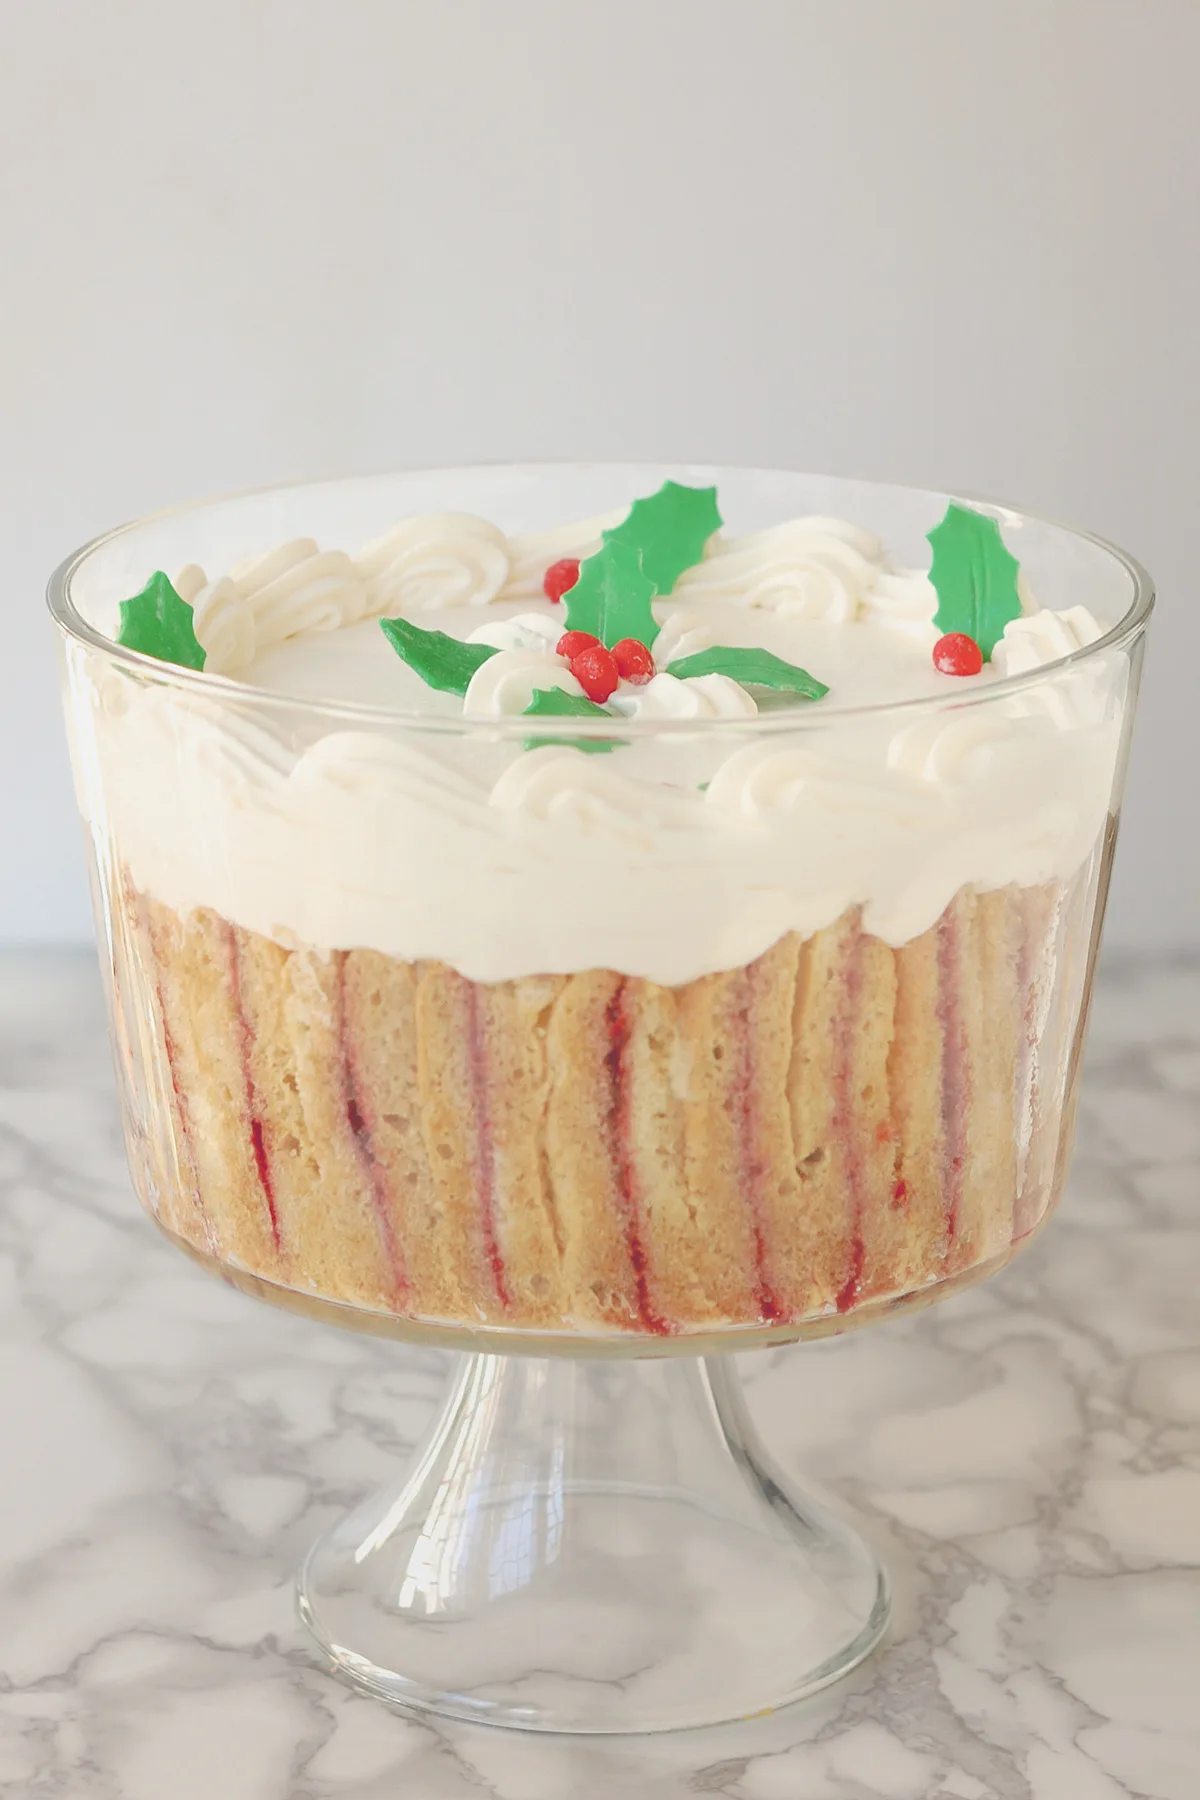 a glass bowl of trifle with holly decorations.